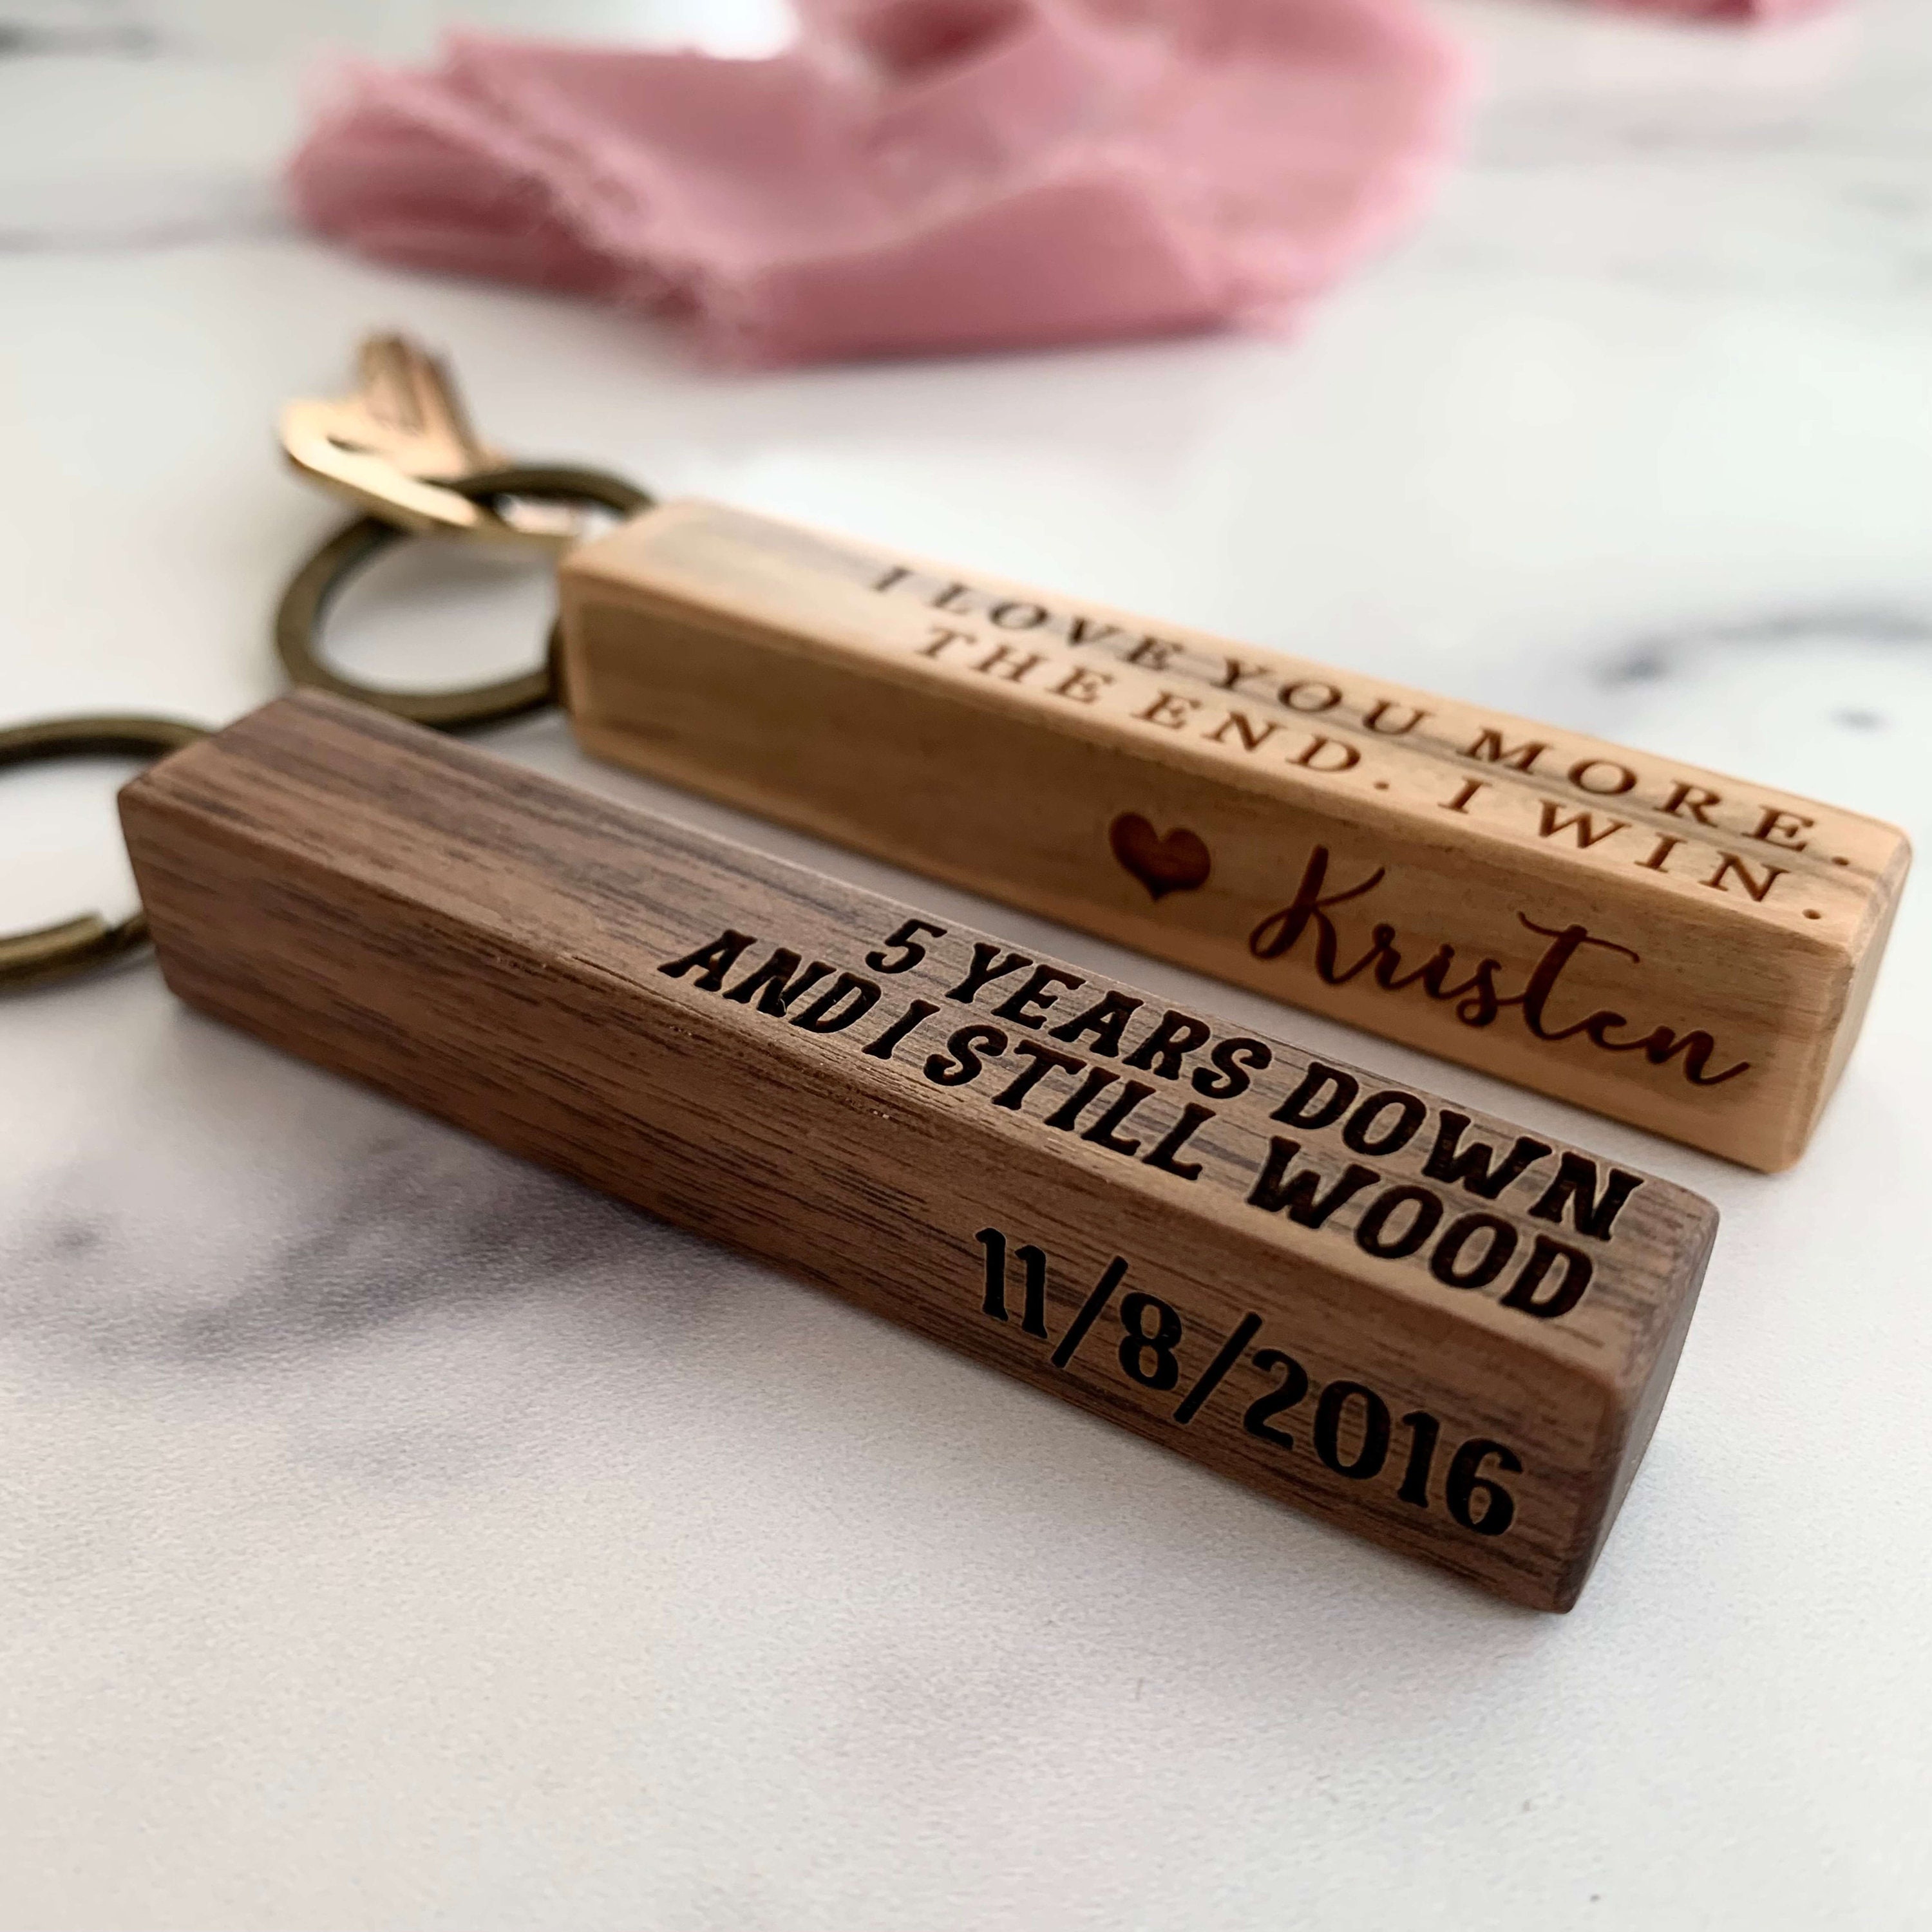 Ideas For Wedding Anniversary Gifts – Gift Ideas Anywhere  Mens  anniversary gifts, Romantic anniversary gifts, 5 year anniversary gift